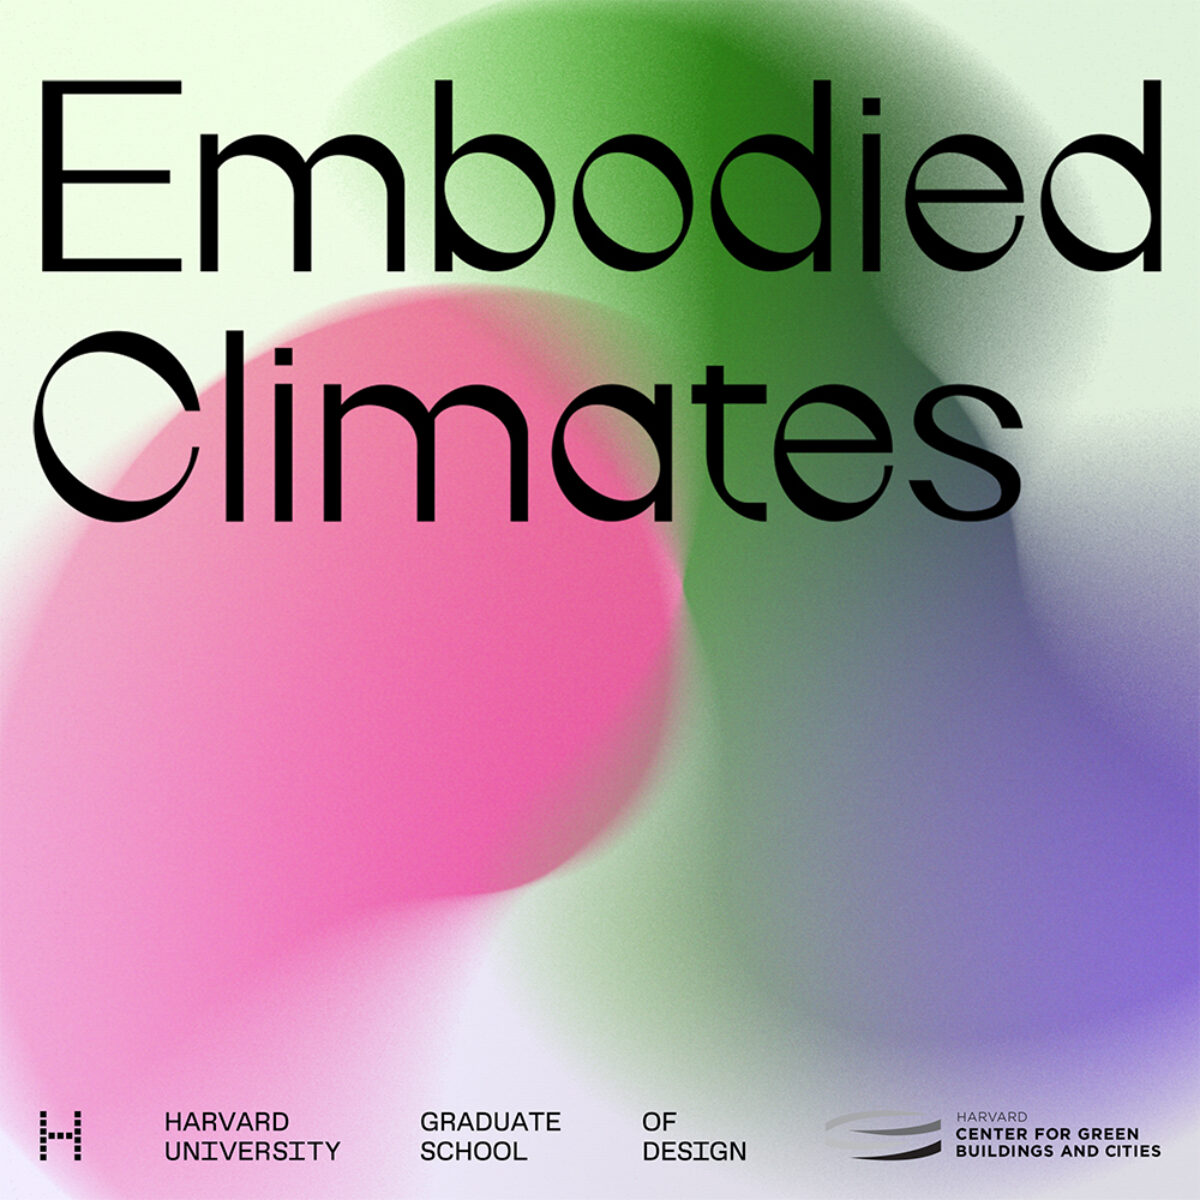 pink, green, and purple abstract swirls overlayed with text that reads Embodied Climates